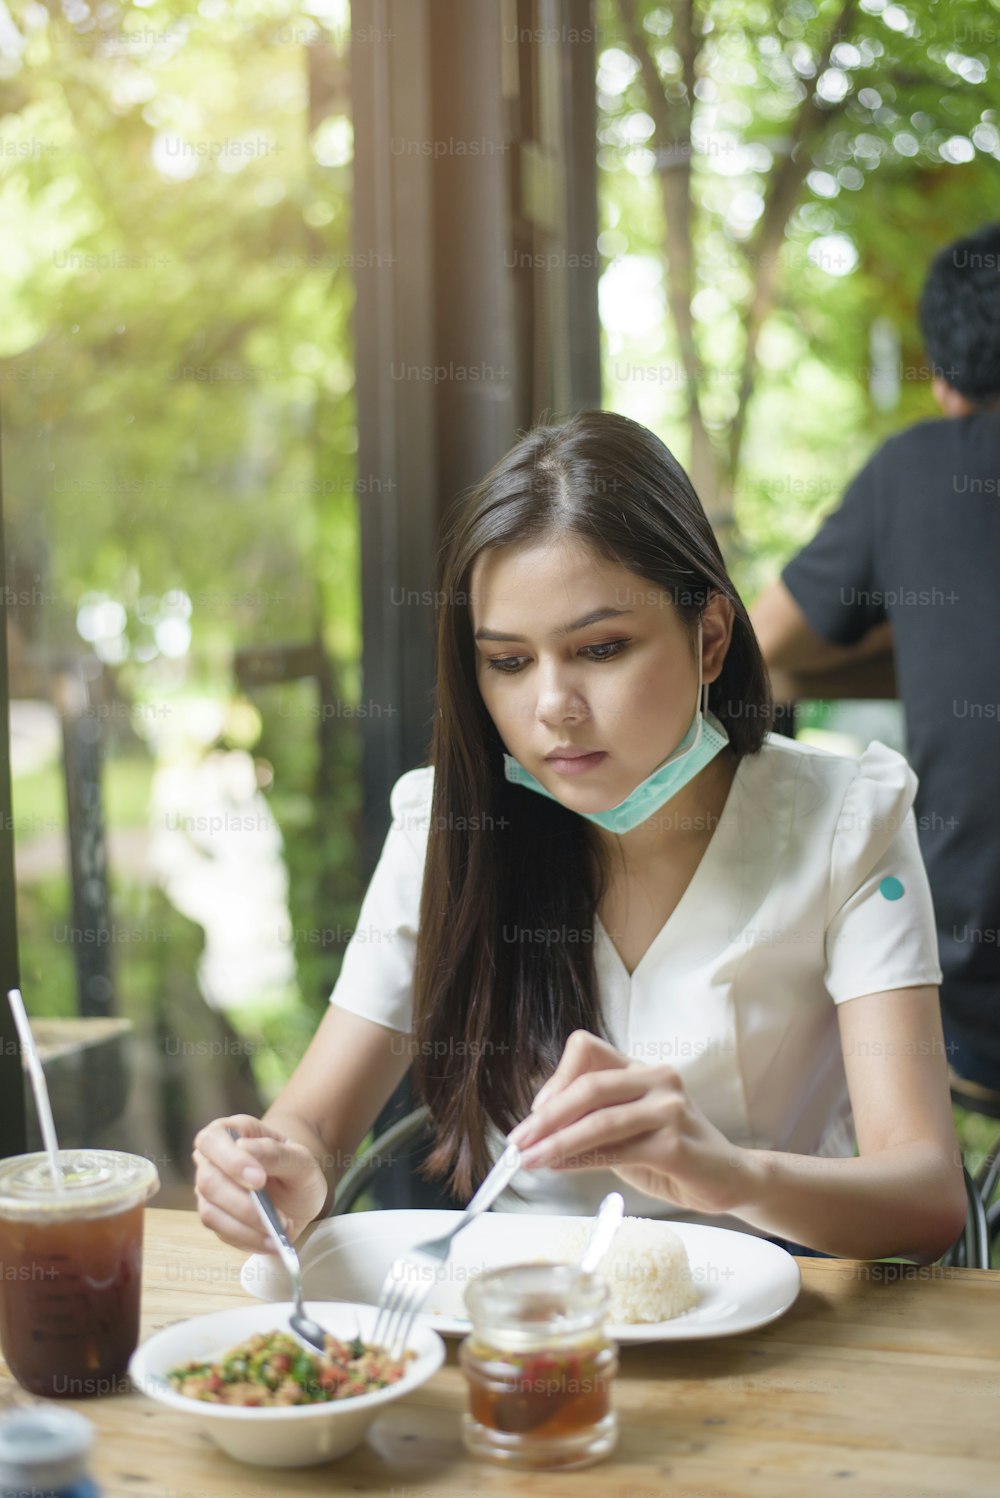 young woman with  face mask is having food in restaurant, New normal concept.